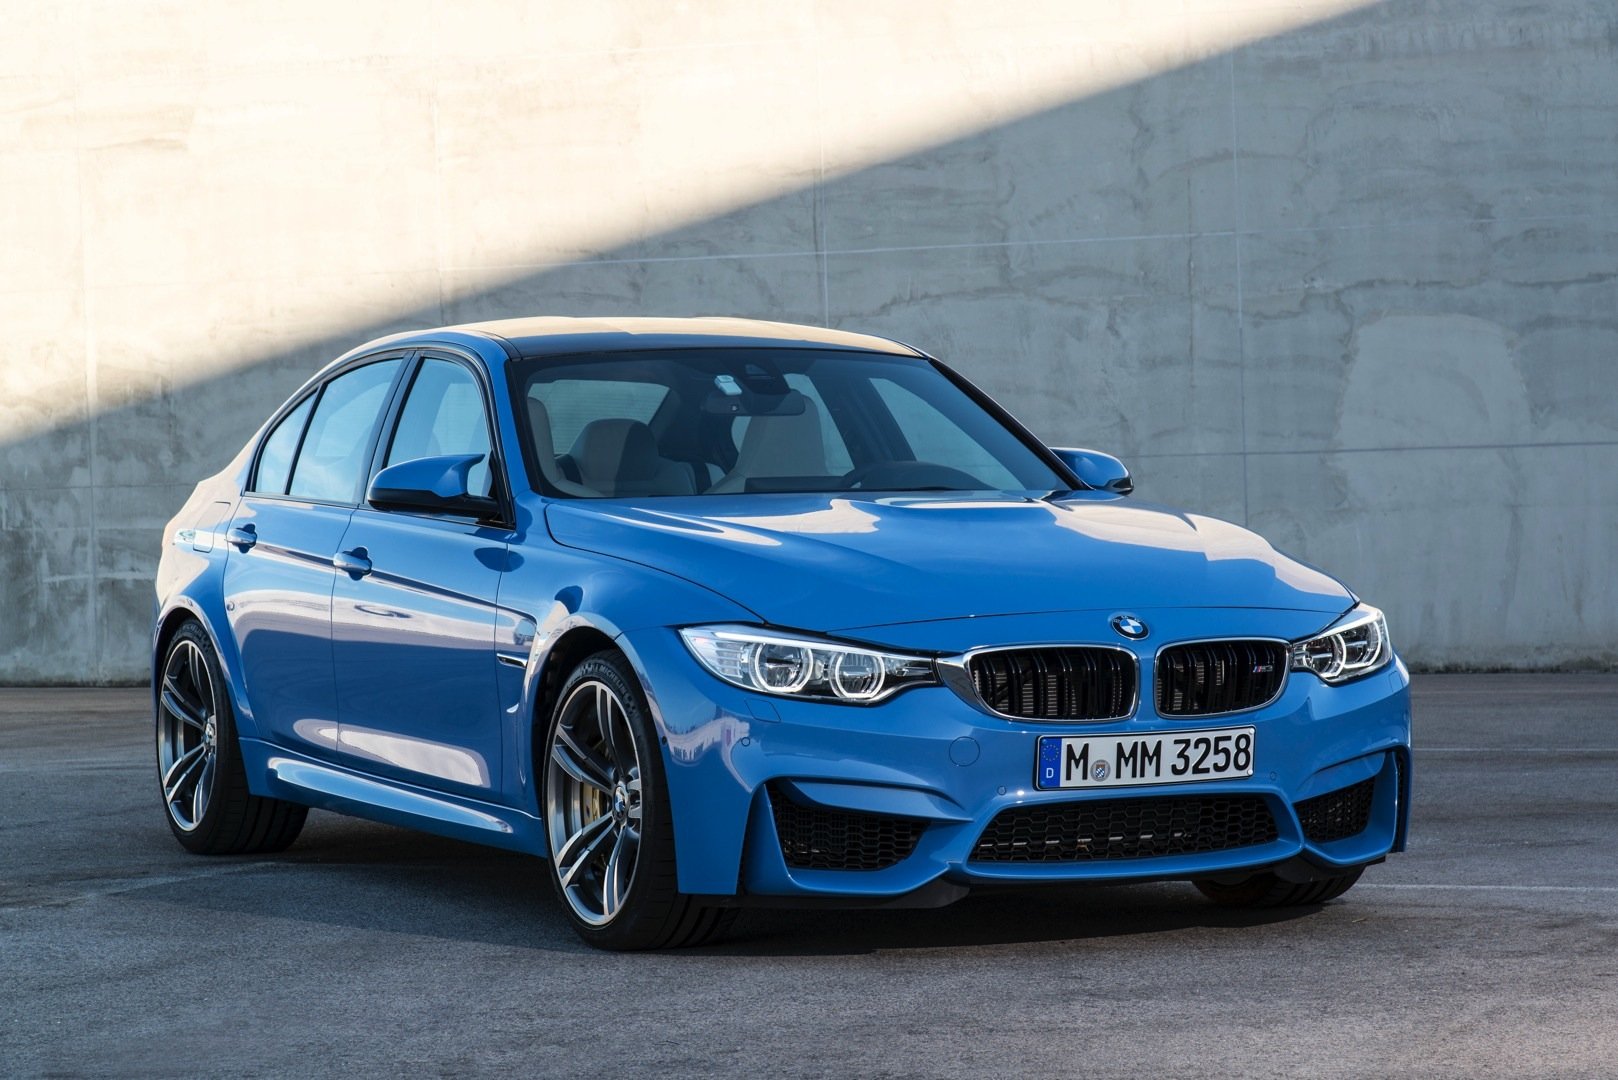 New Bmw m3 2014 Wallpaper images